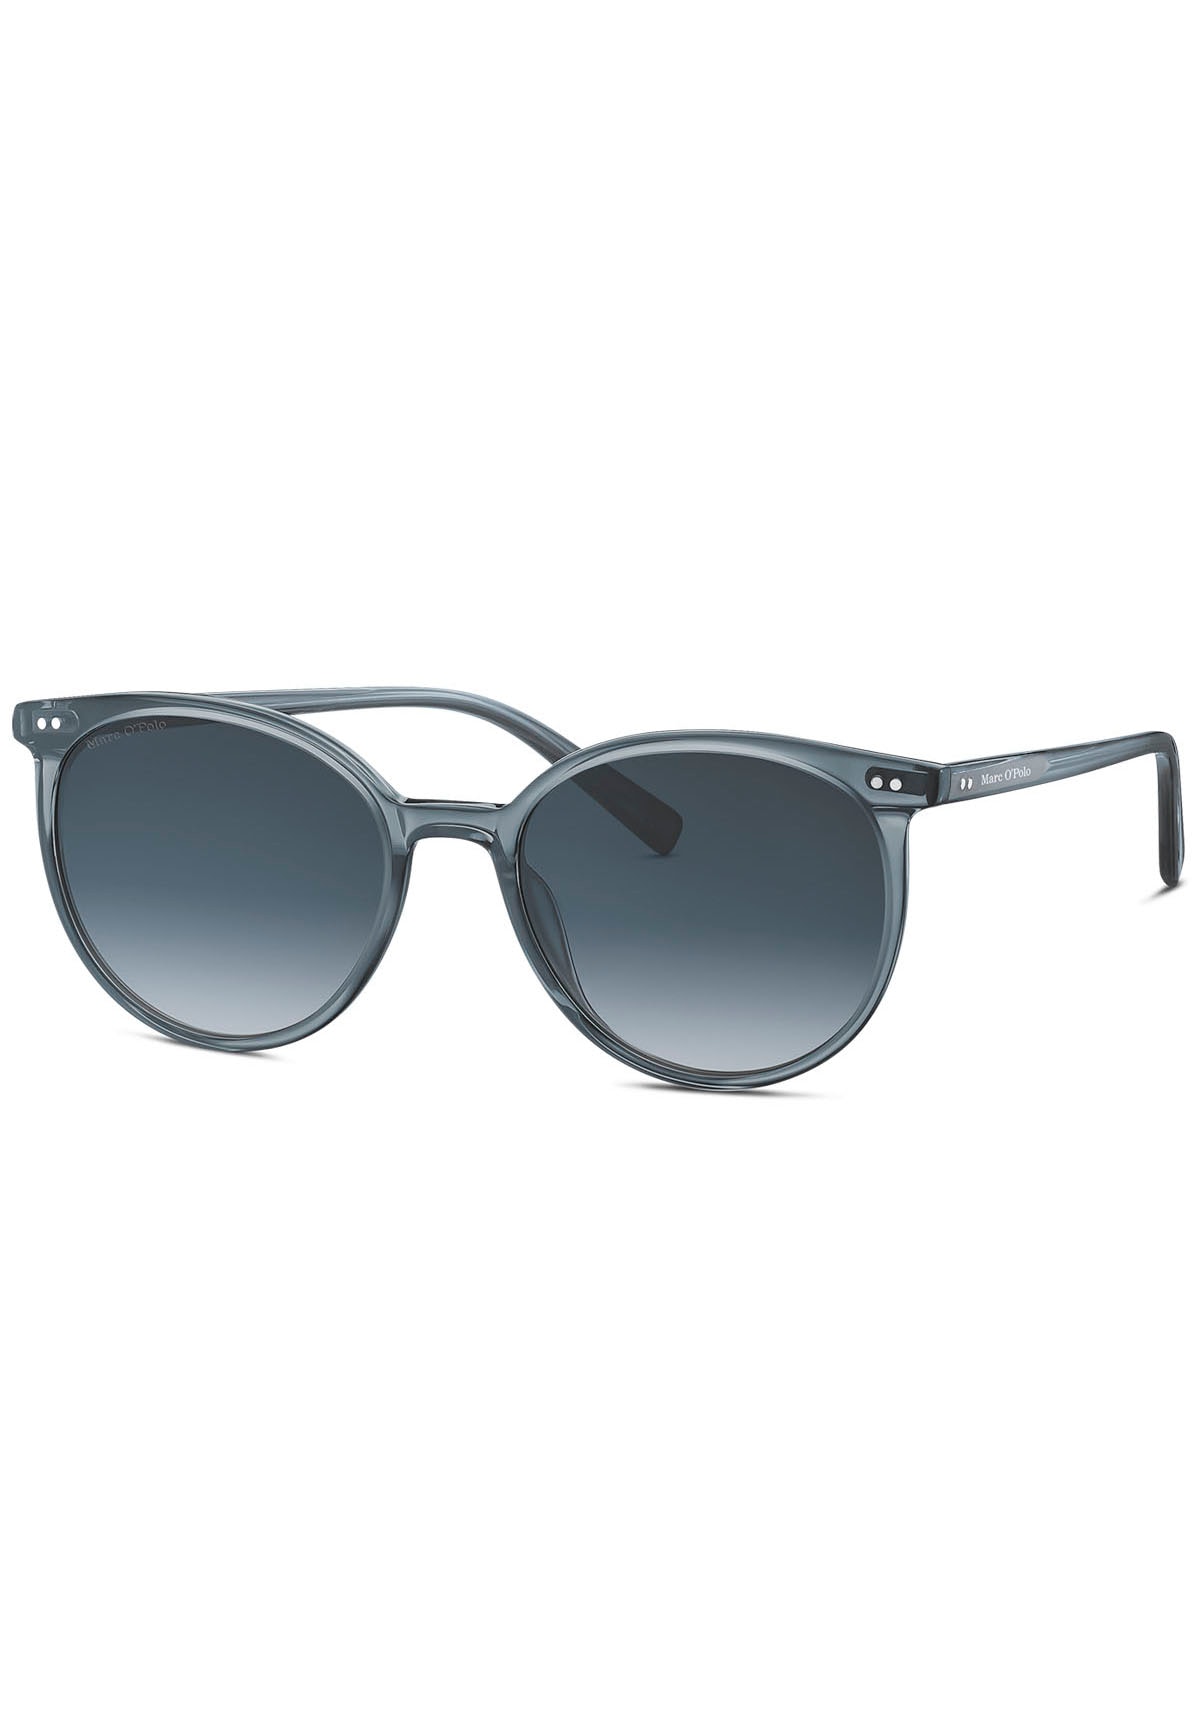 Marc OPolo Sonnenbrille "Modell 506164", Panto-Form